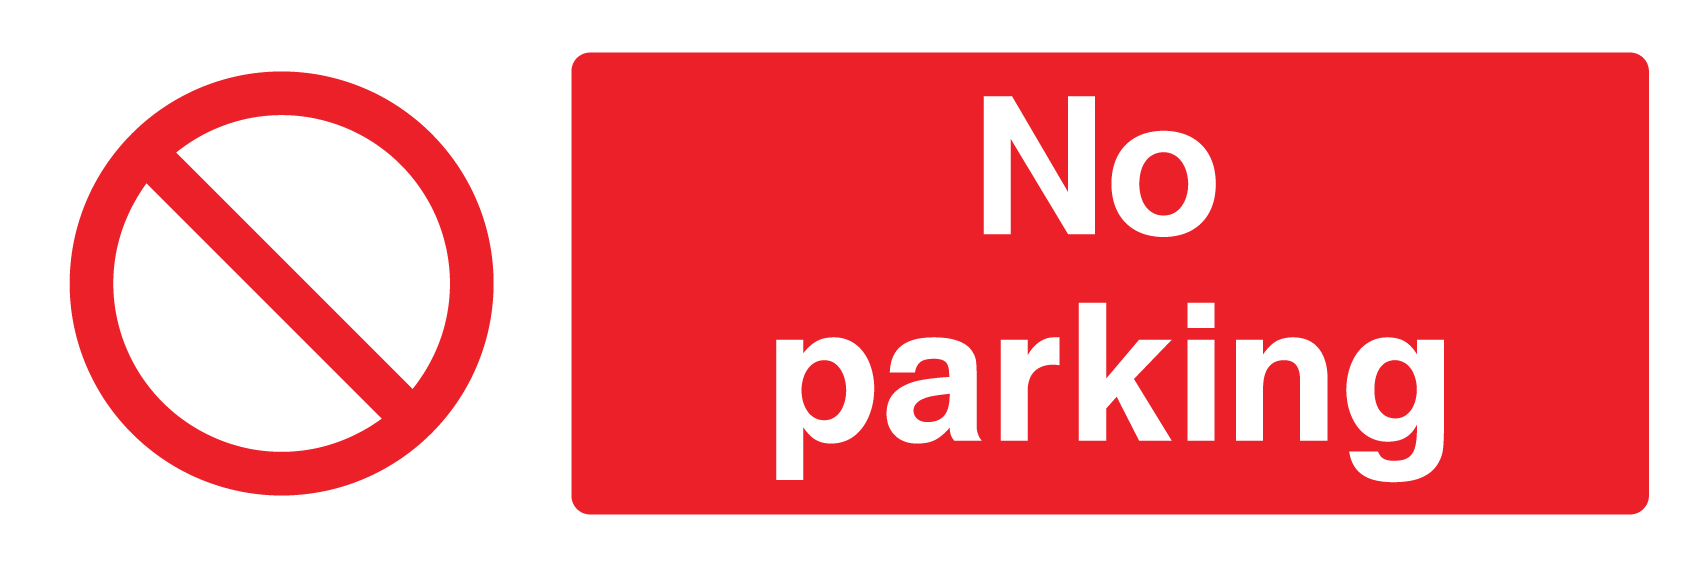 Staff Parking Only Correx Safety Sign 600mm x 400mm Red. 